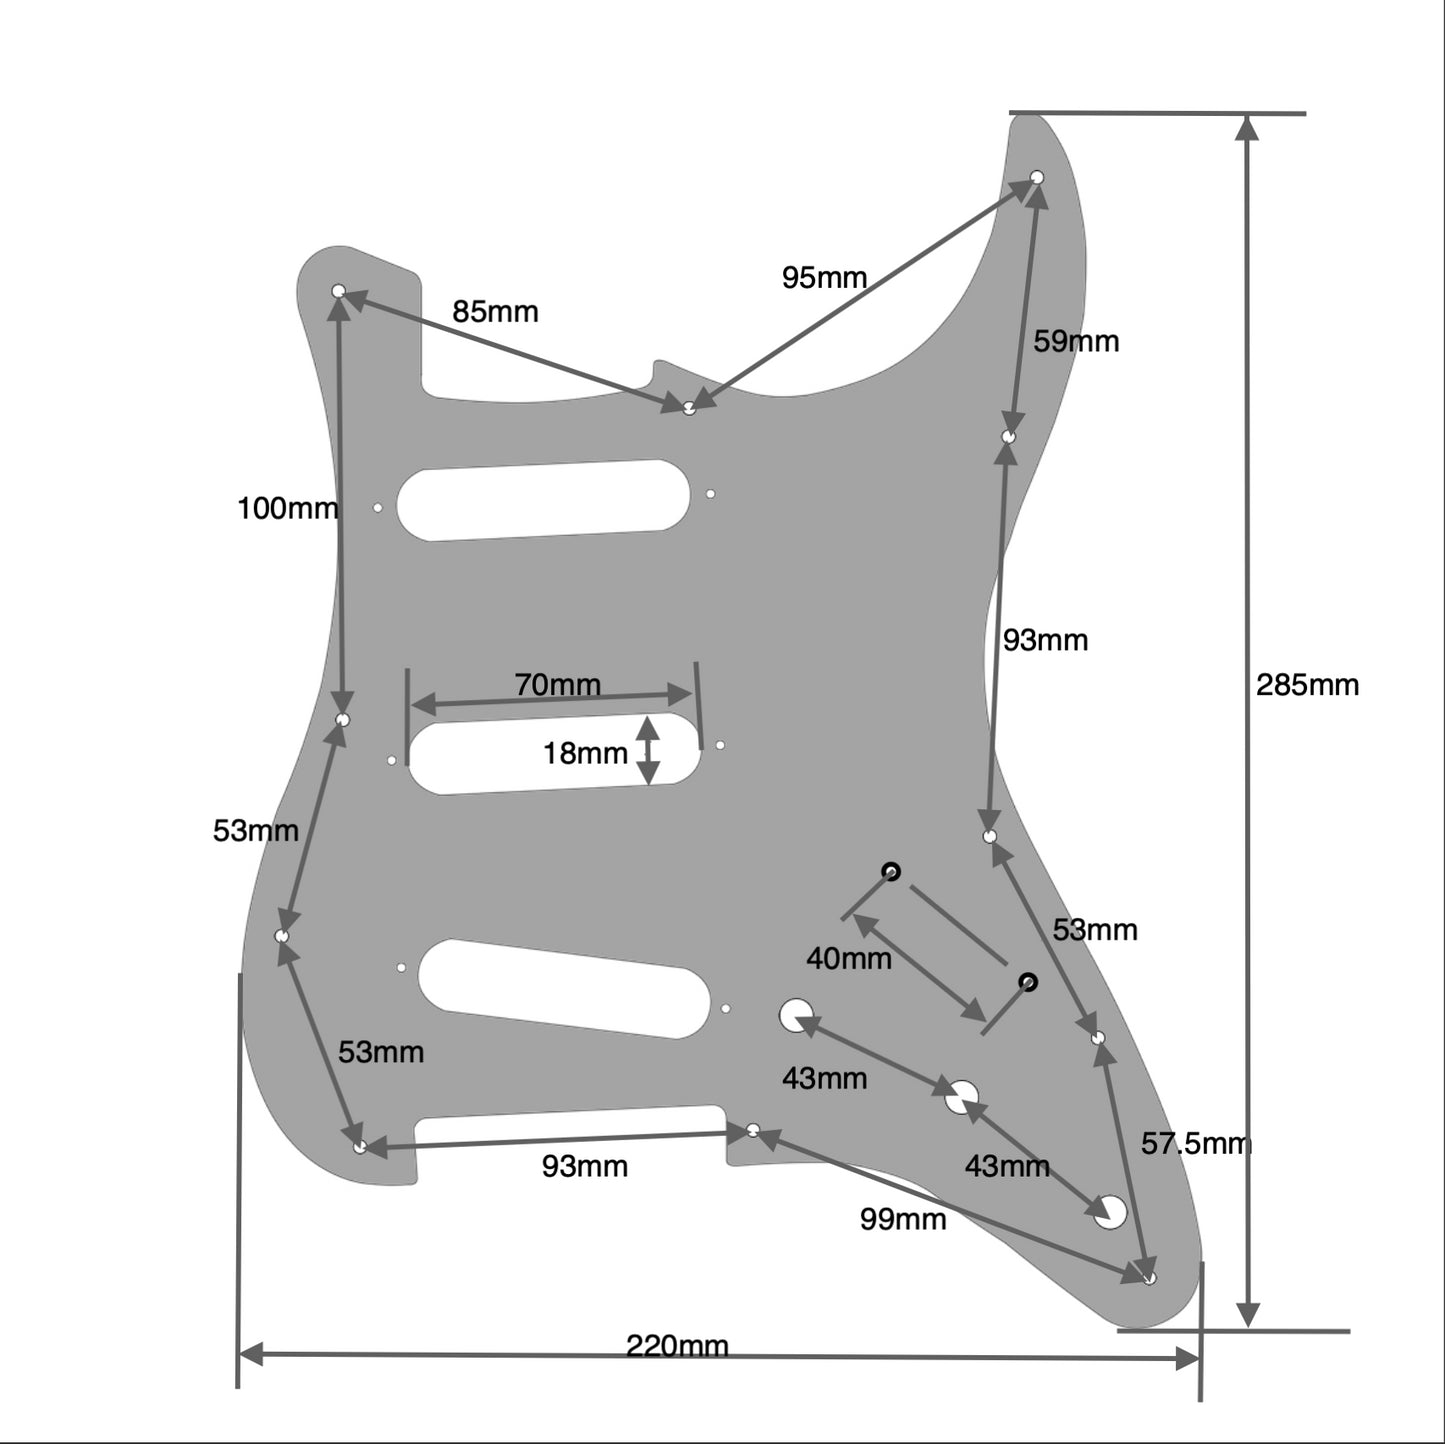 11-Hole Stratocaster Compatible Scratchplate Pickguard SSS White Pearl 3-ply